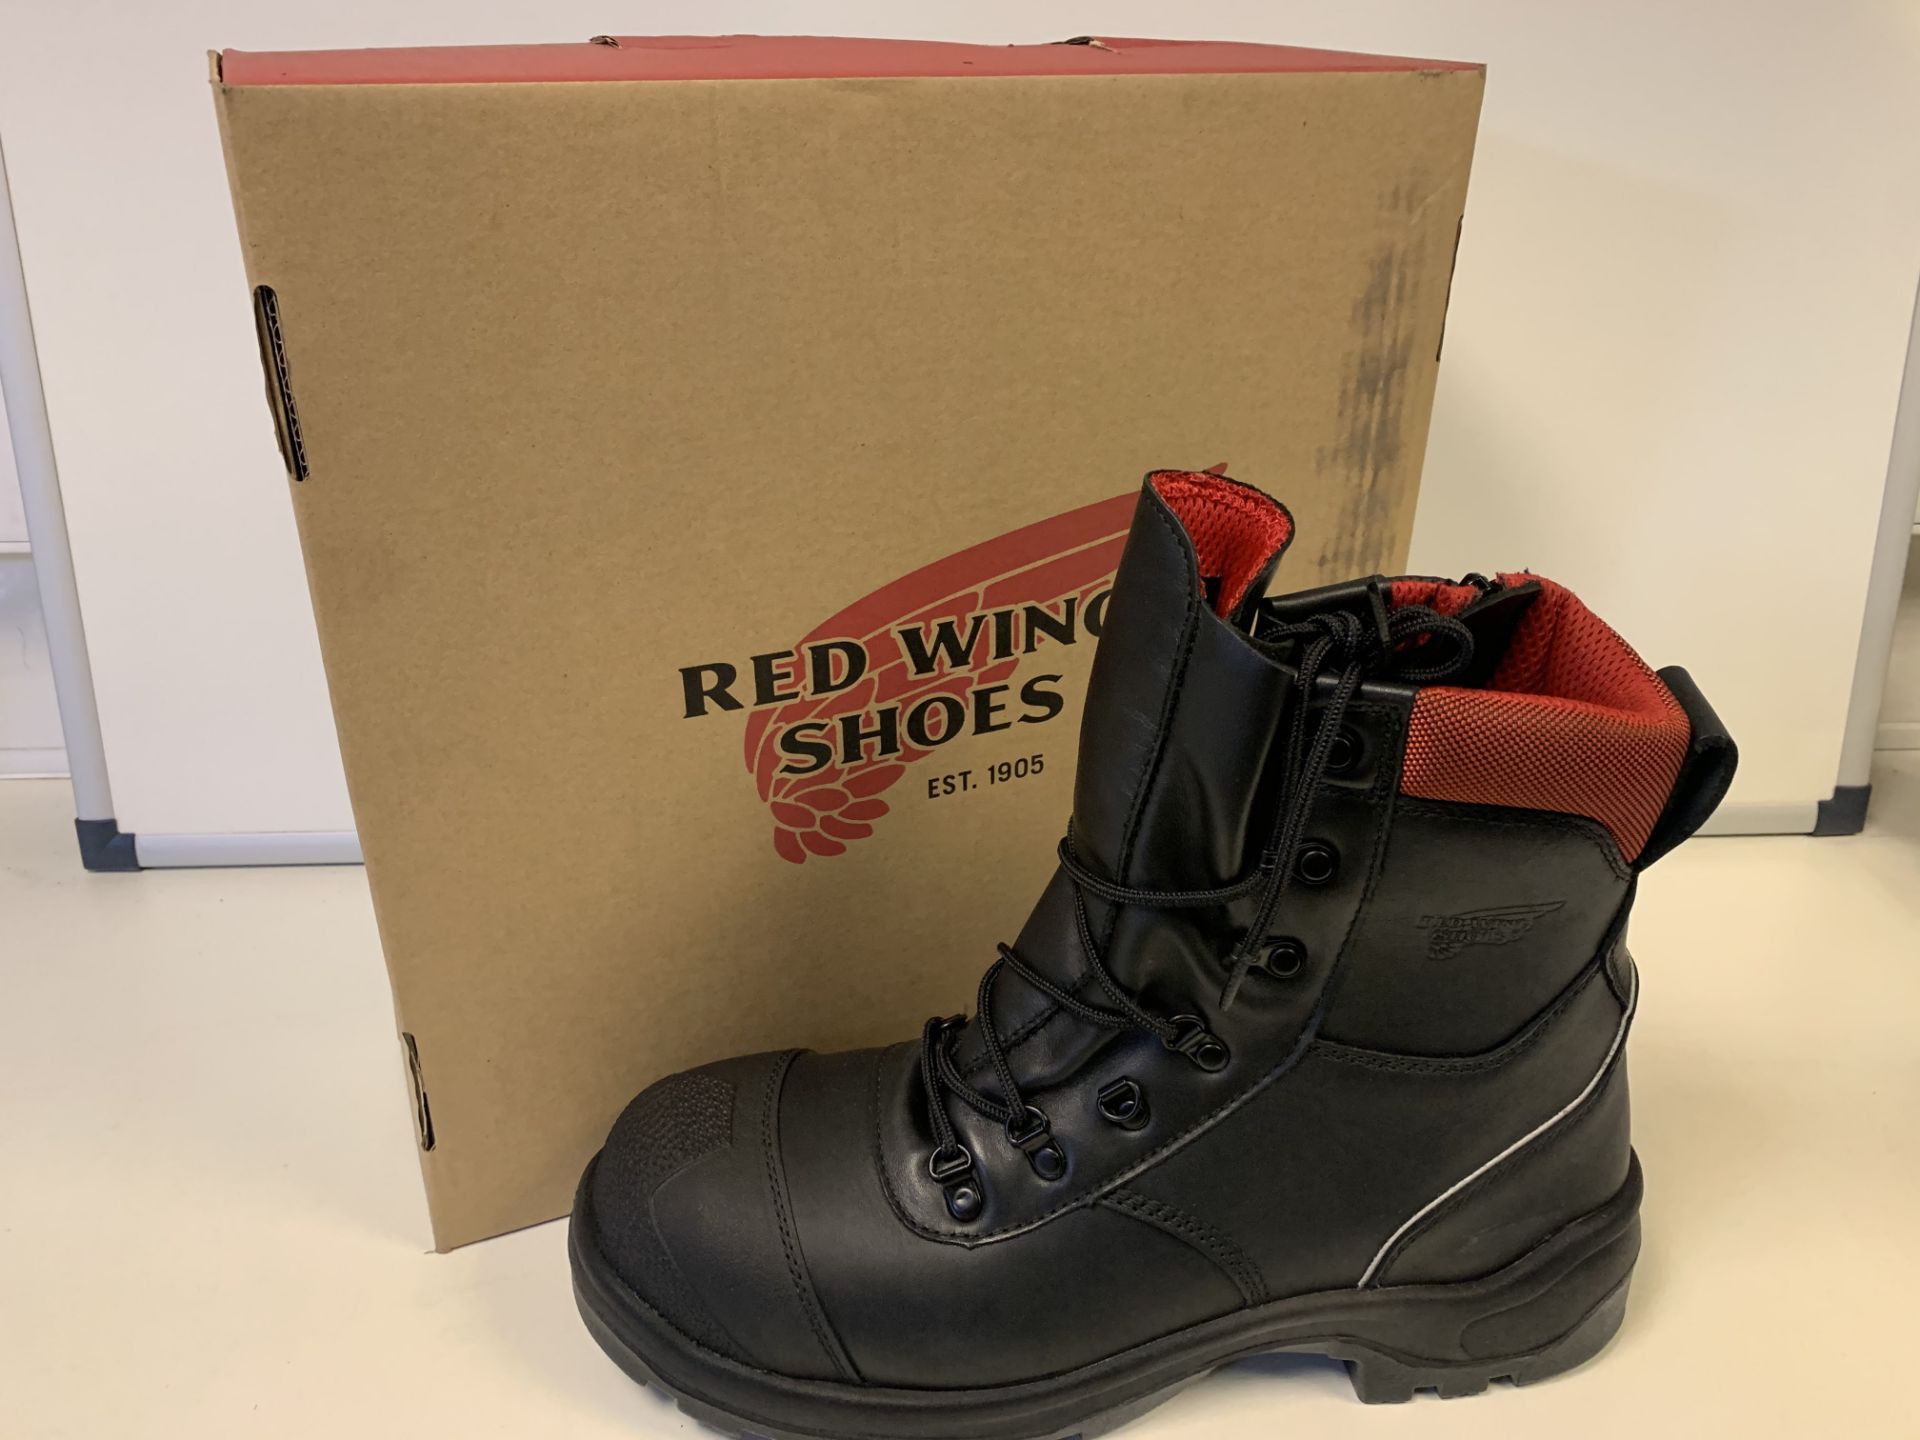 6 X BRAND NEW BOXED RED WING NON METALLIC TOE PUNCTURE RESISTANT SIZE 5 WORK BOOTS (669/02)